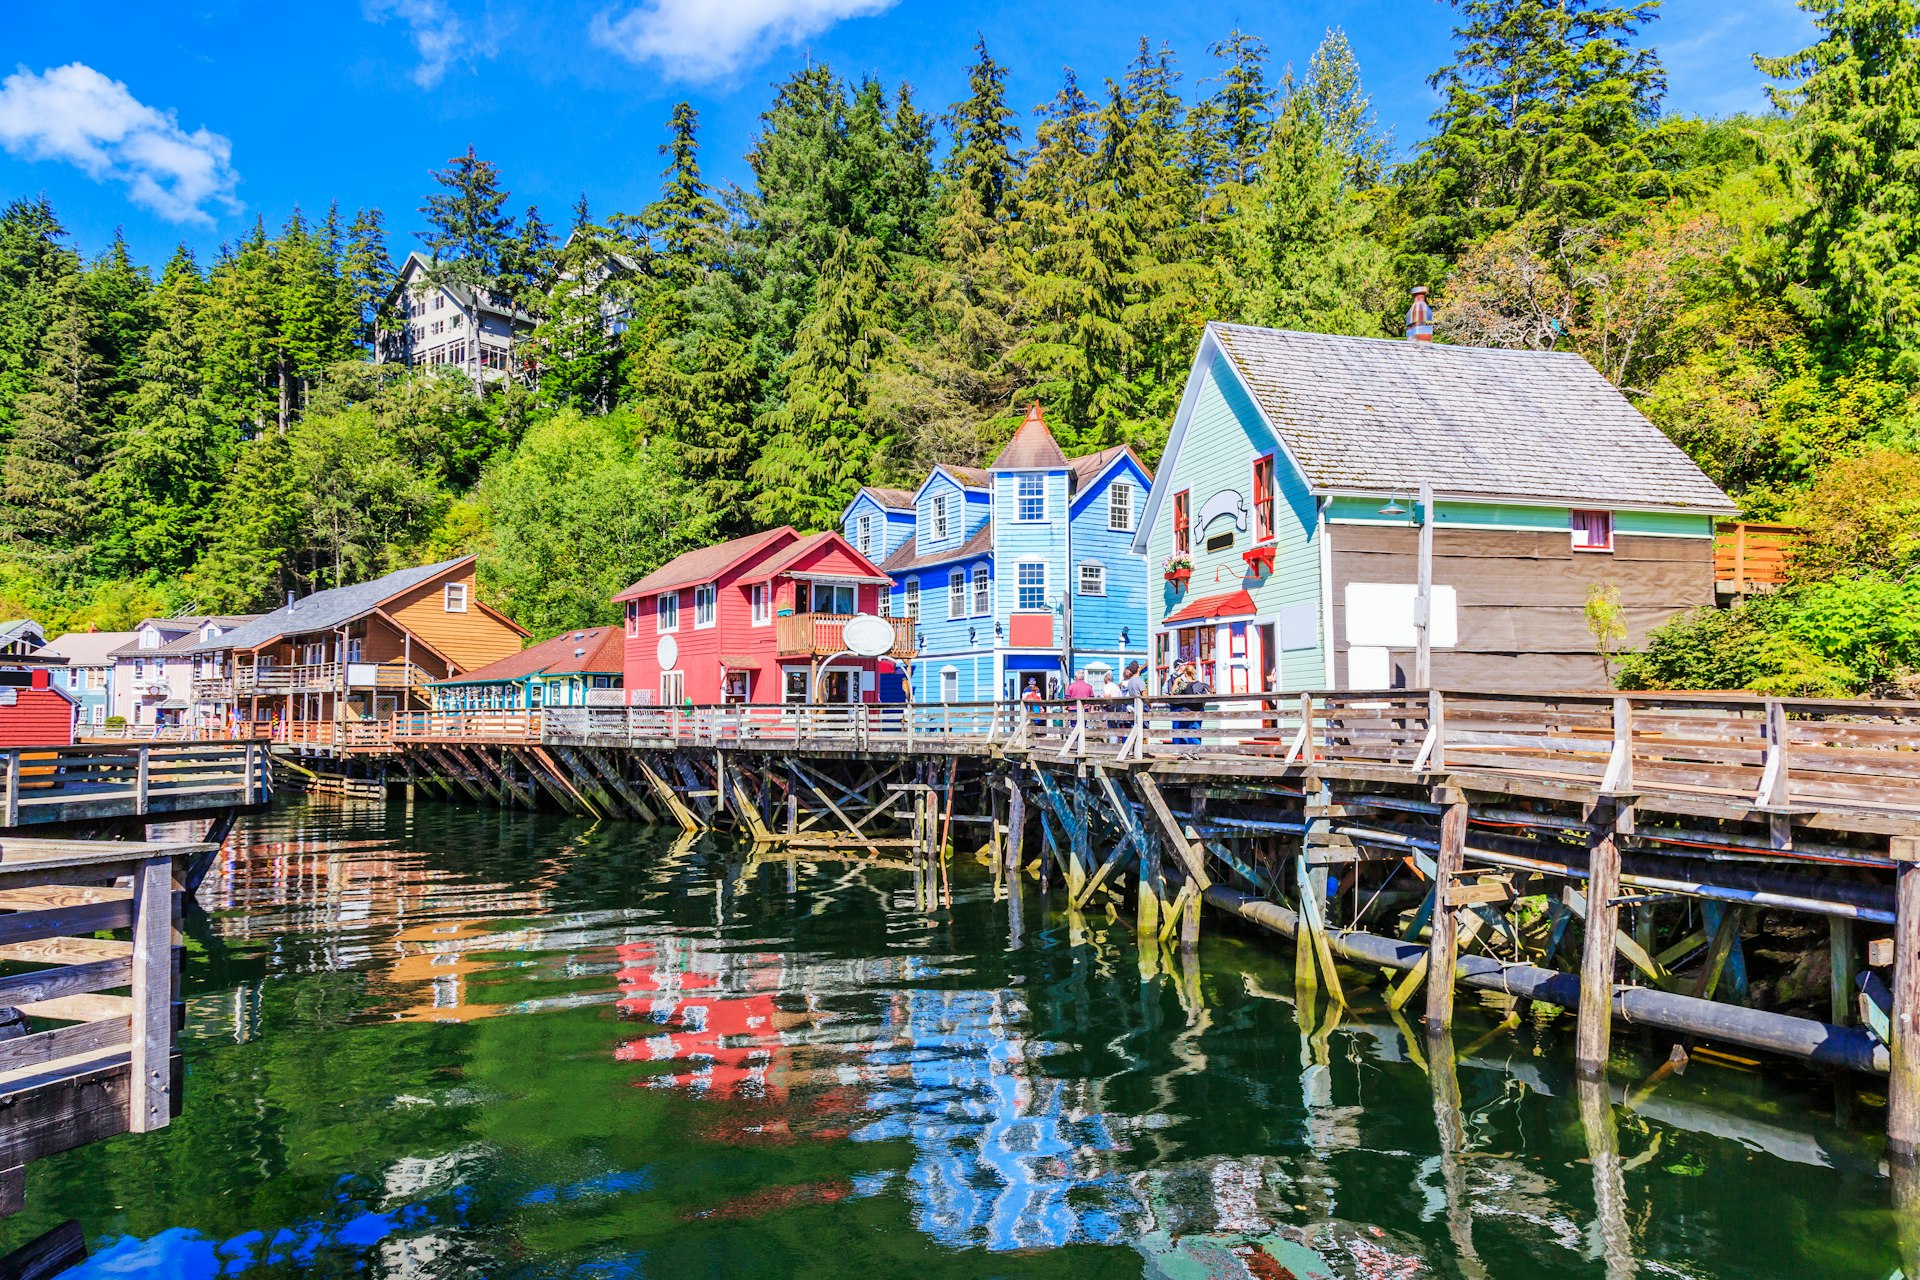 A row of brightly painted houses in Ketchikan, Alaska.